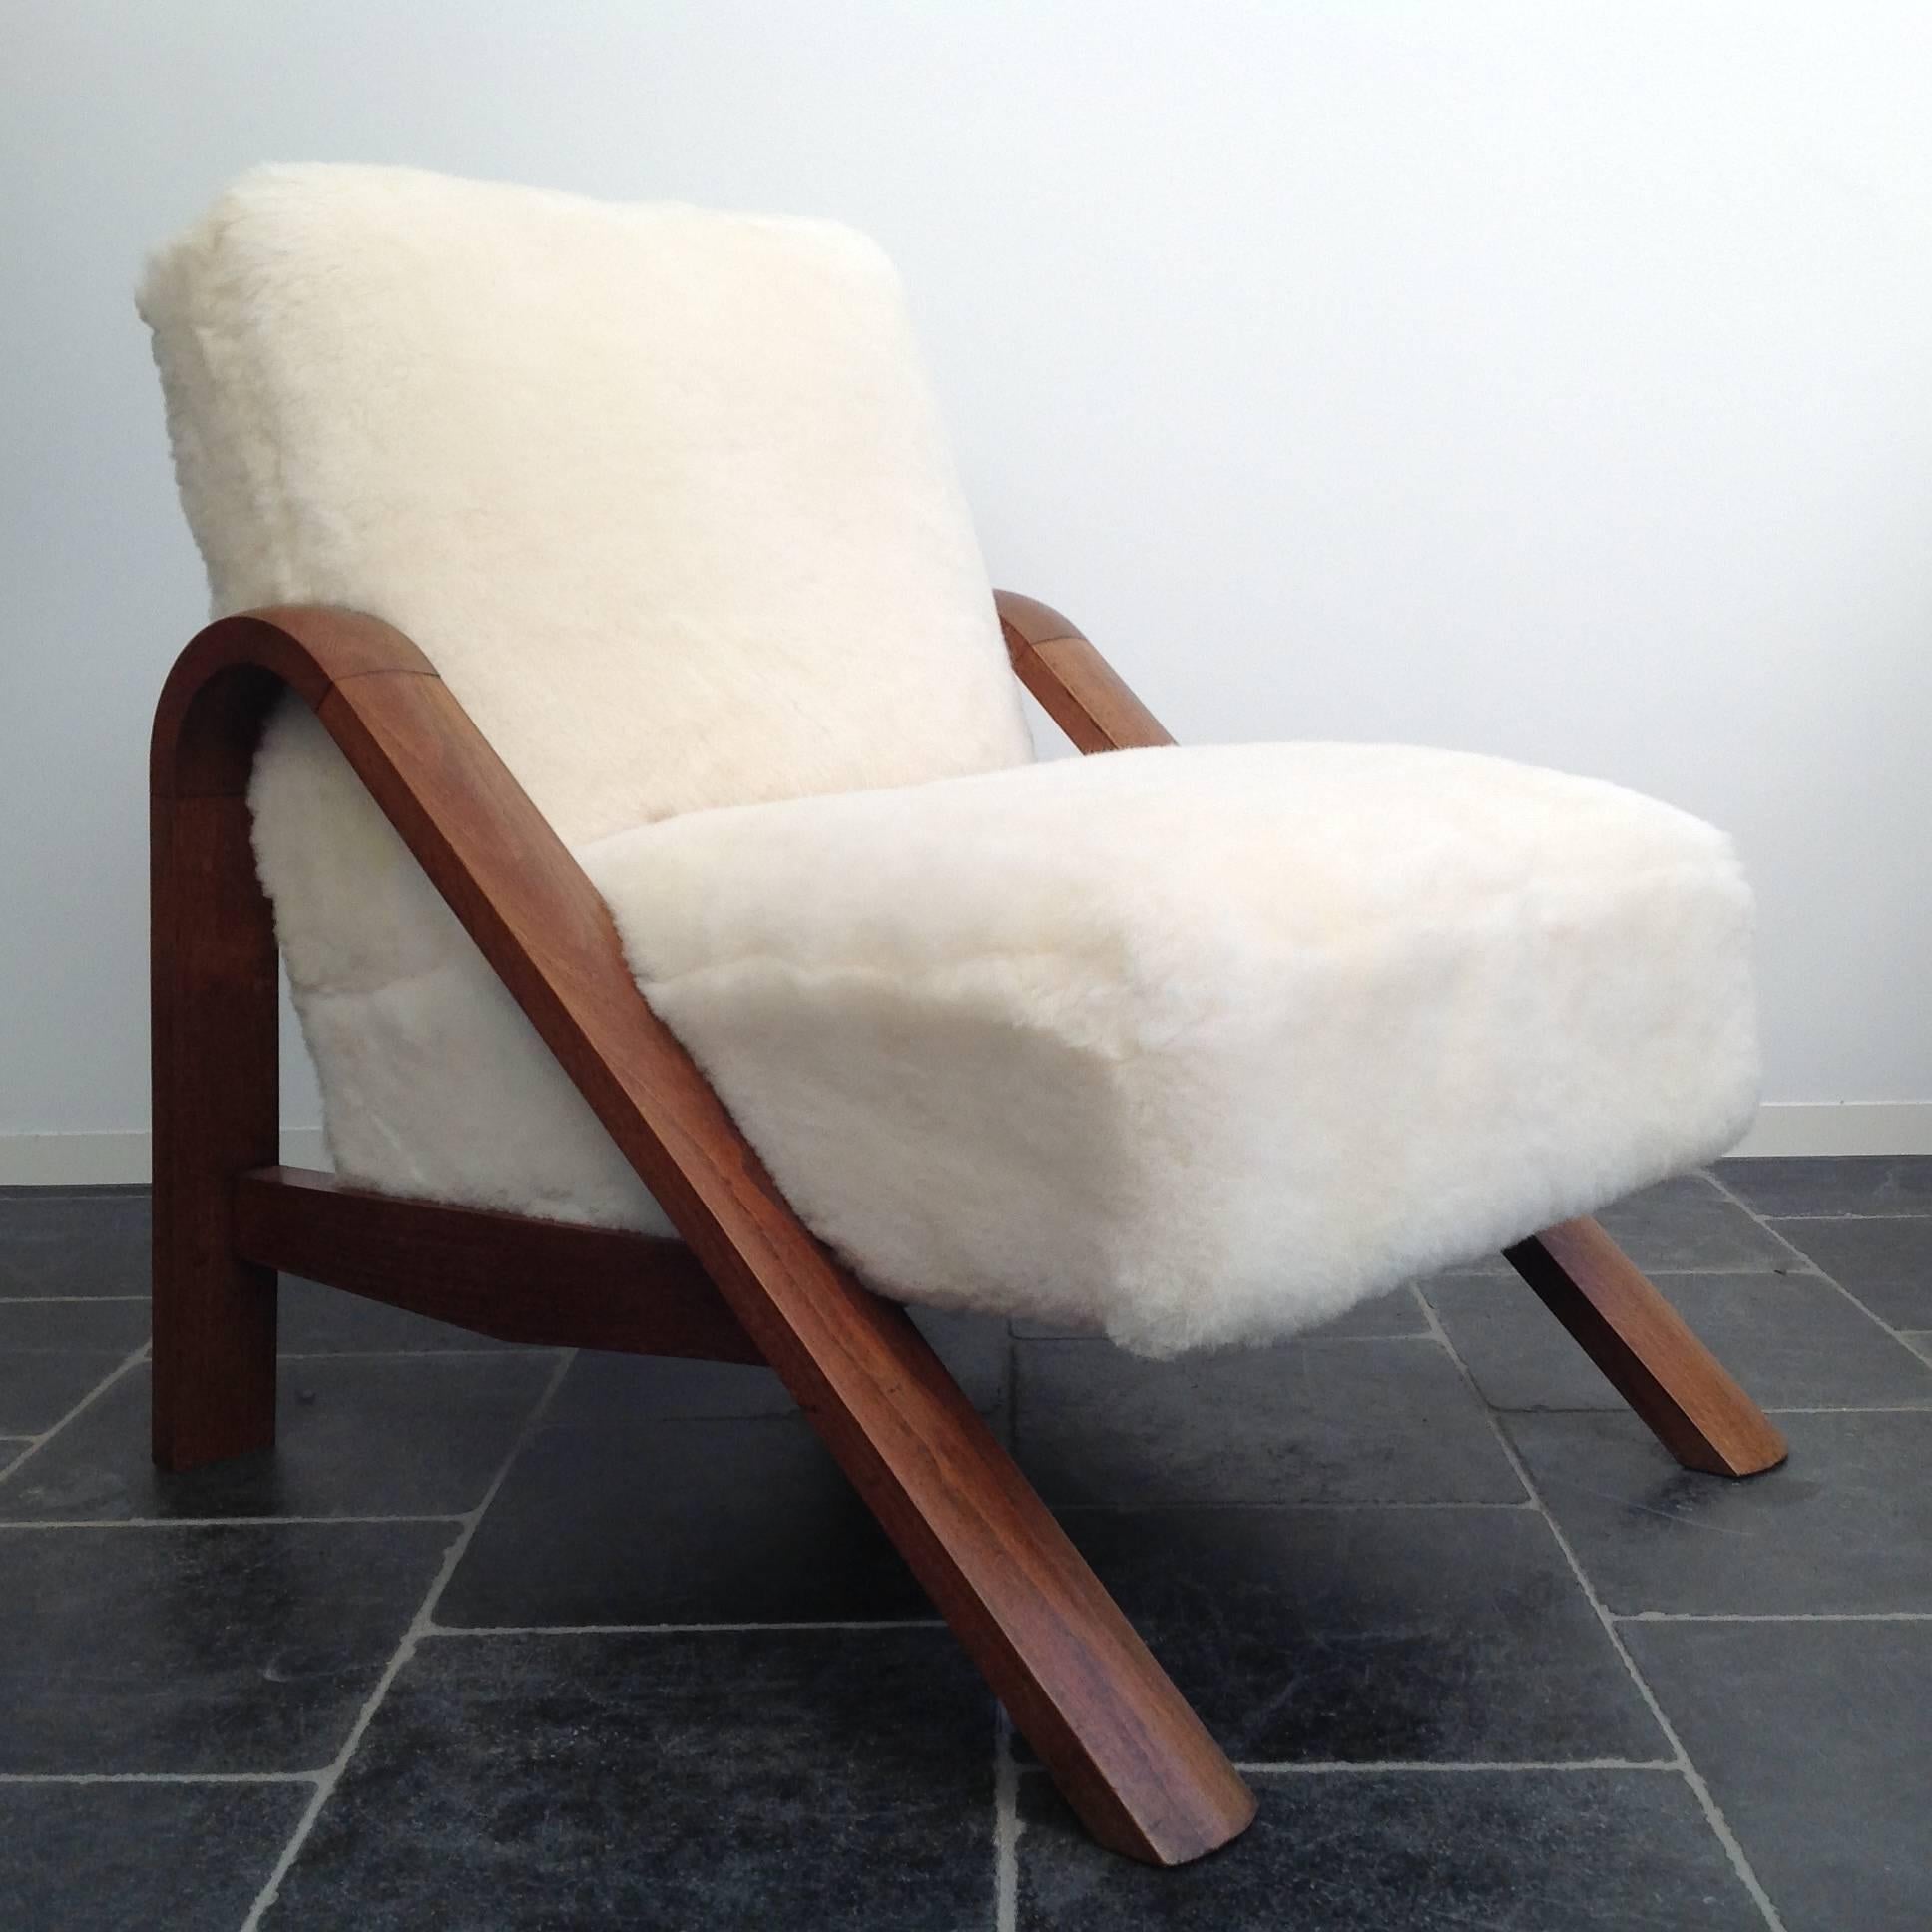 Woodwork Two Impressive, Club Chairs Upholstered with Sheepskin, Anno, 1940